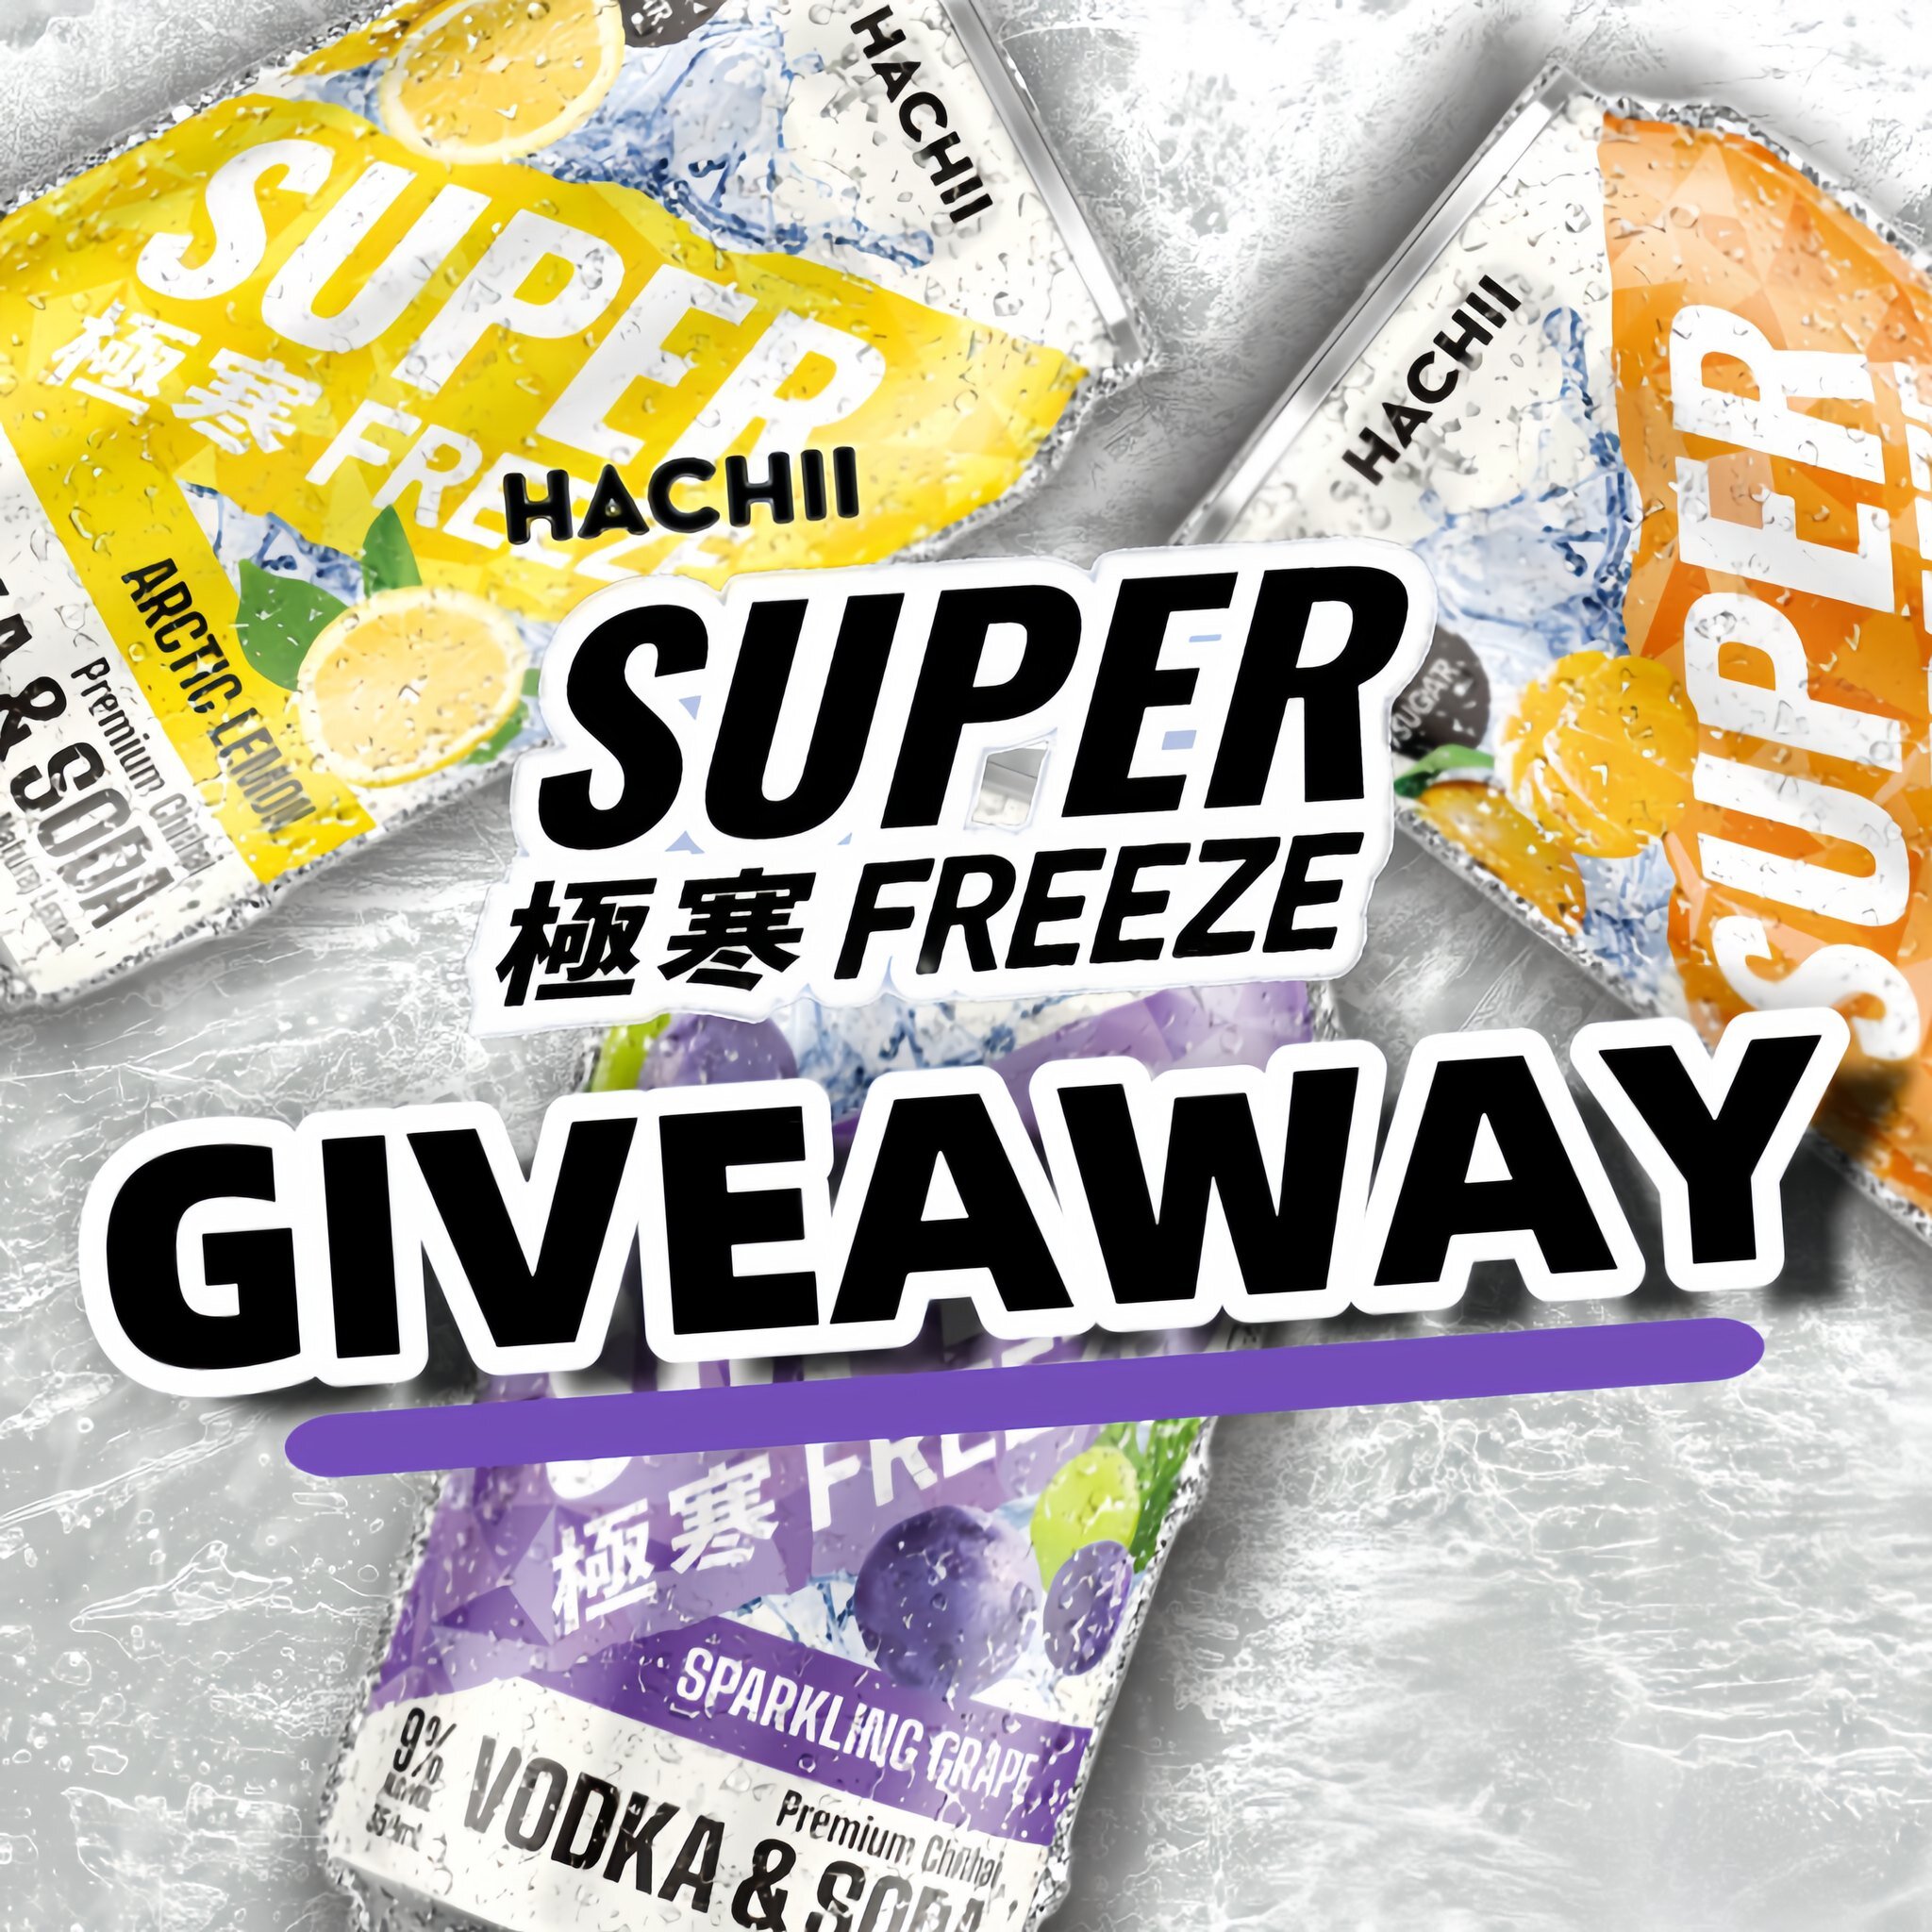 🎉 Hachii Boozy Giveaway
How to enter:
Must be 18+✔️
Australia-based 🌏 
Like: Give us a thumbs up 👍
Follow: Hit that follow button for updates @drinkhachii 🧡
Comment: Drop a line below to enter 🗨️
We're selecting 30 winners randomly, and each get